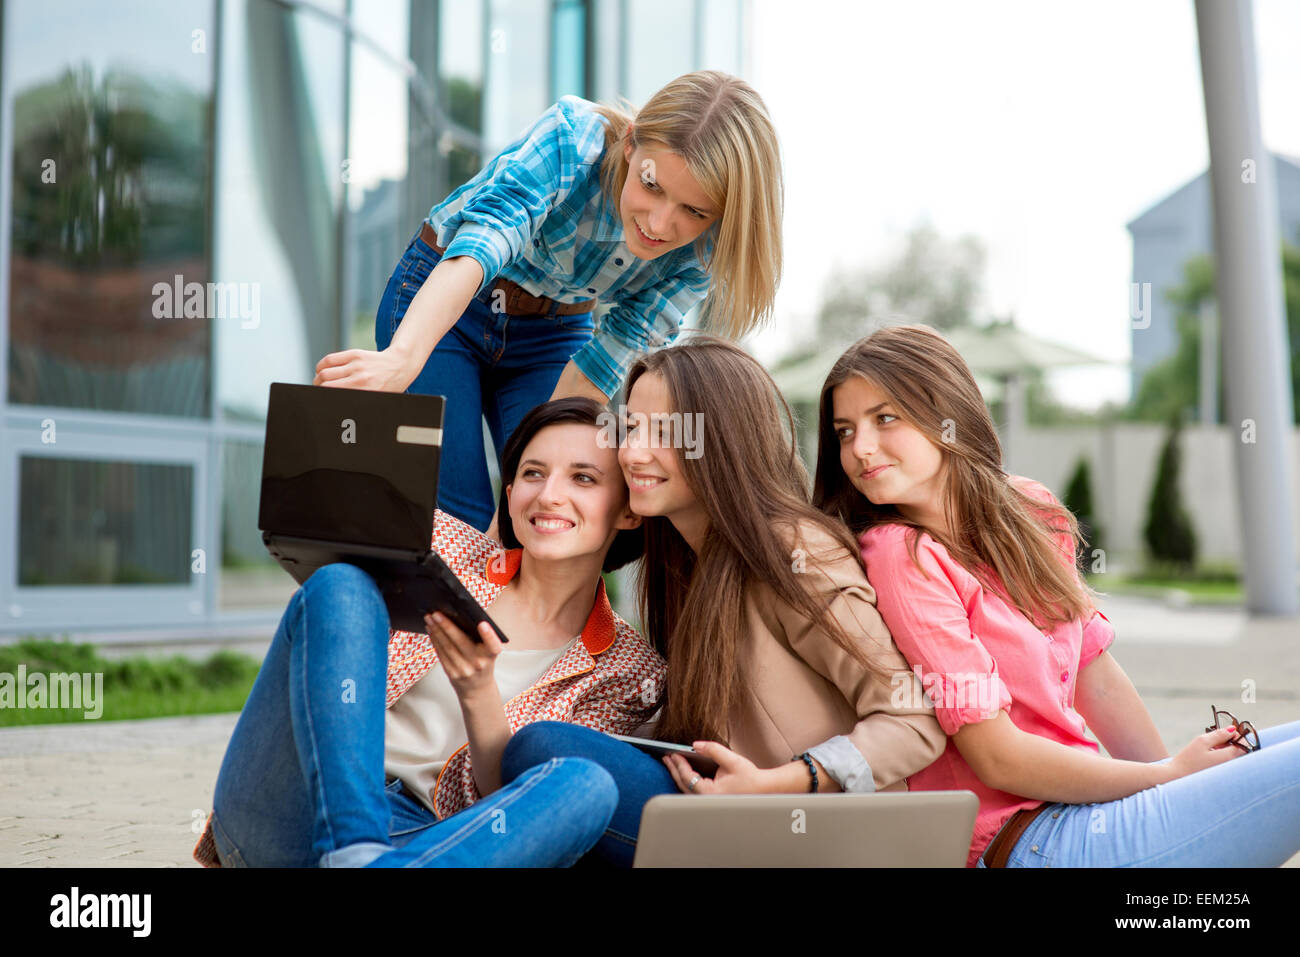 Young and happy girlfriends or classmates having fun at the School or University break. Stock Photo